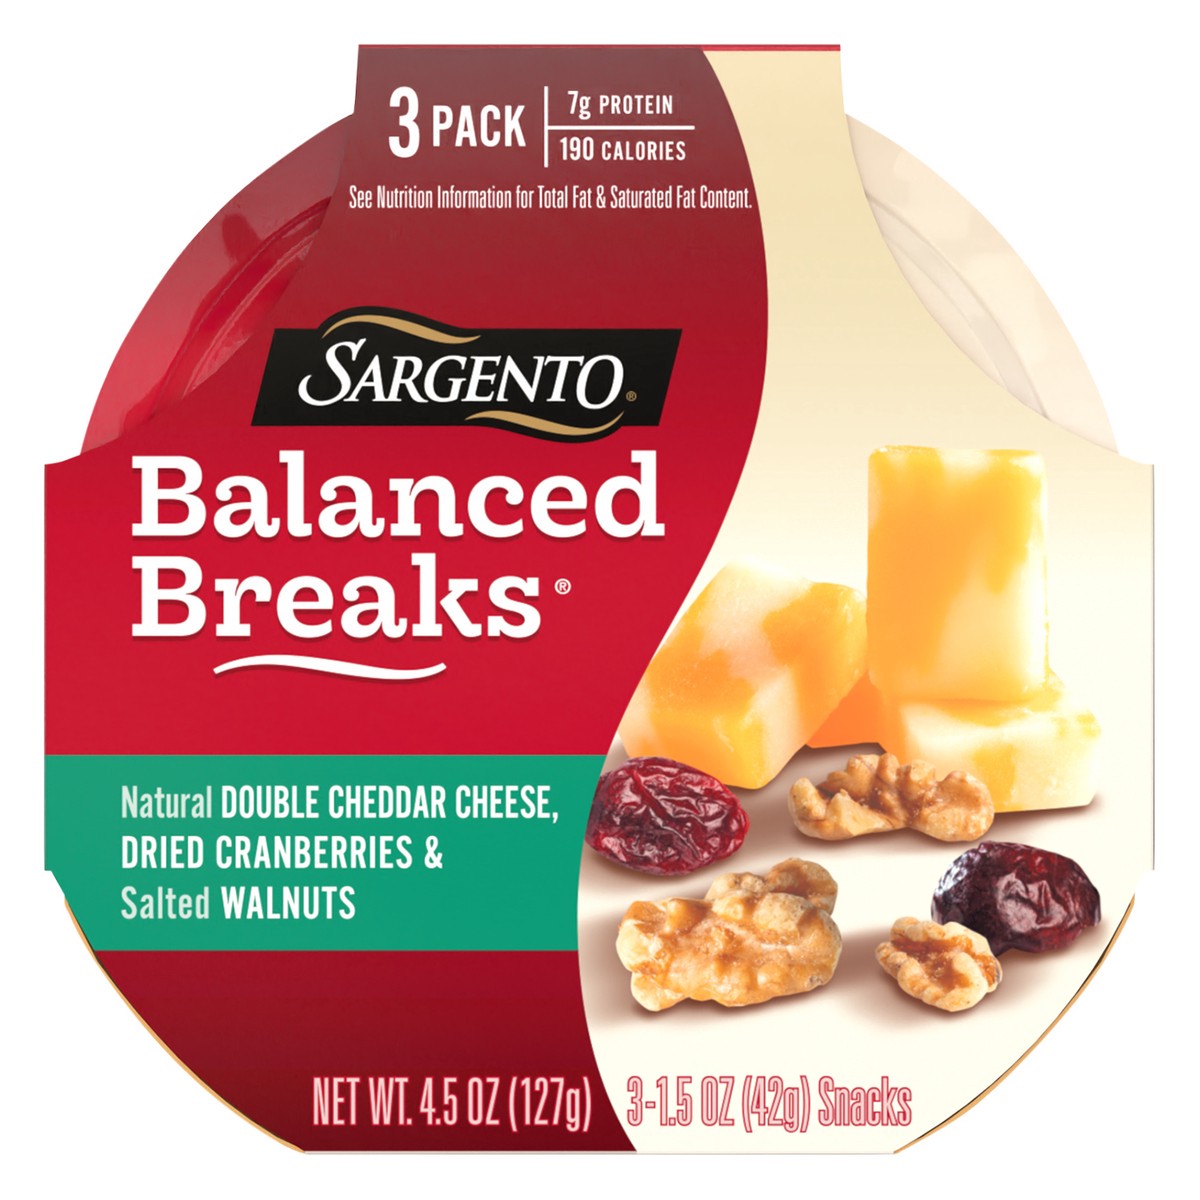 slide 1 of 14, Sargento Balanced Breaks with Natural Double Cheddar Cheese, Dried Cranberries and Salted Walnuts, 1.5 oz., 3-Pack, 4.5 oz